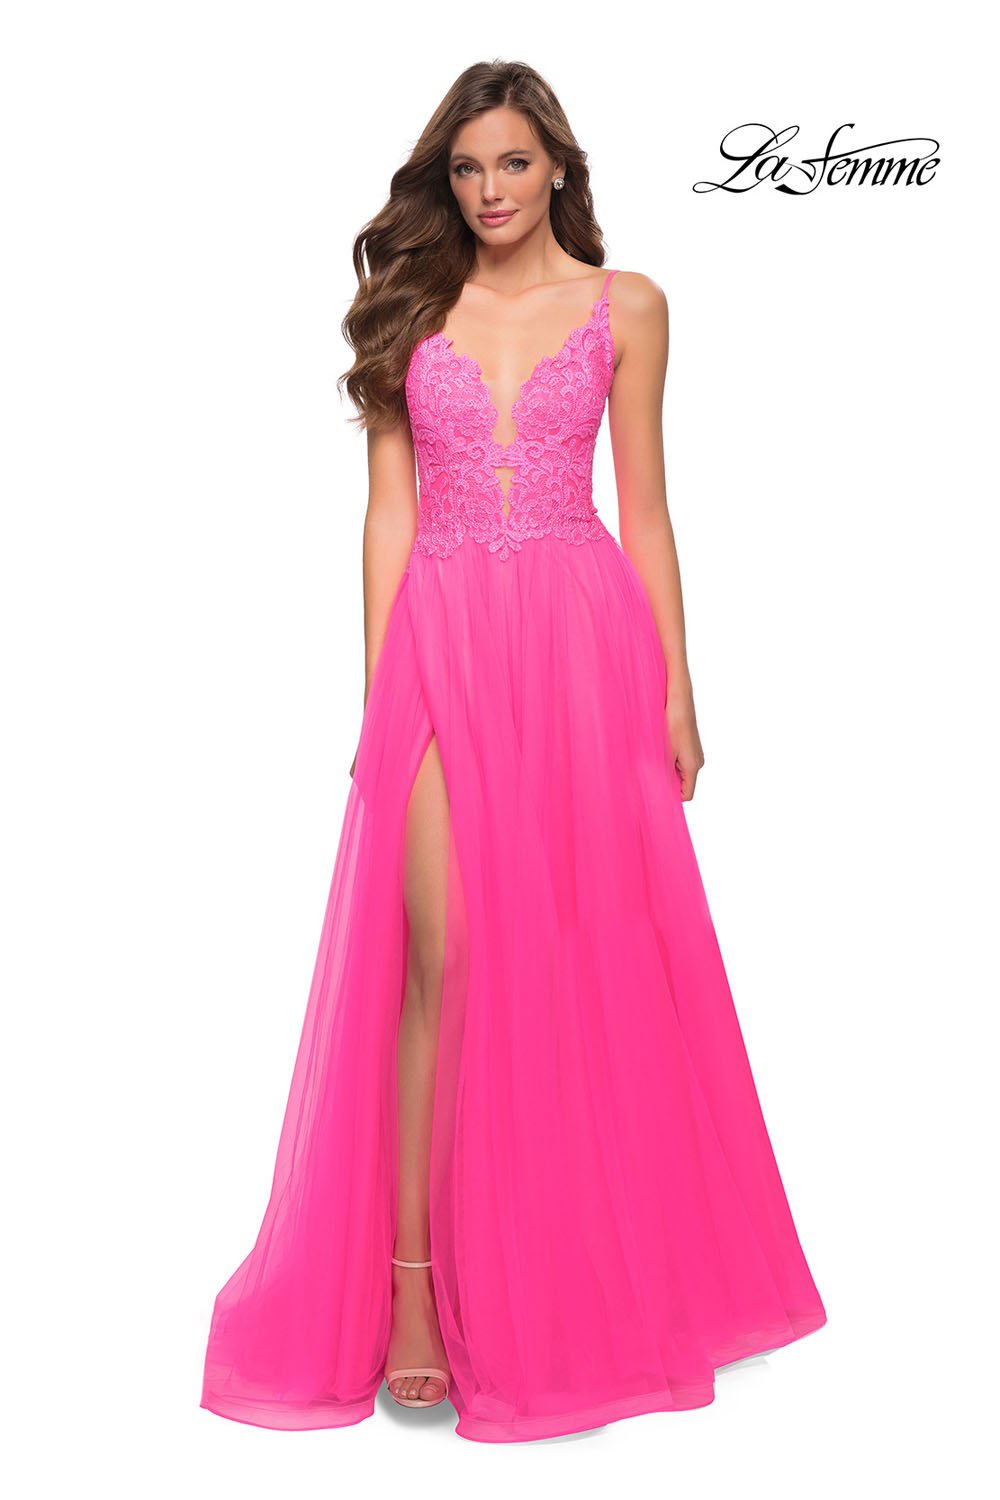 La Femme 29964 dress images in these colors: Neon Pink.